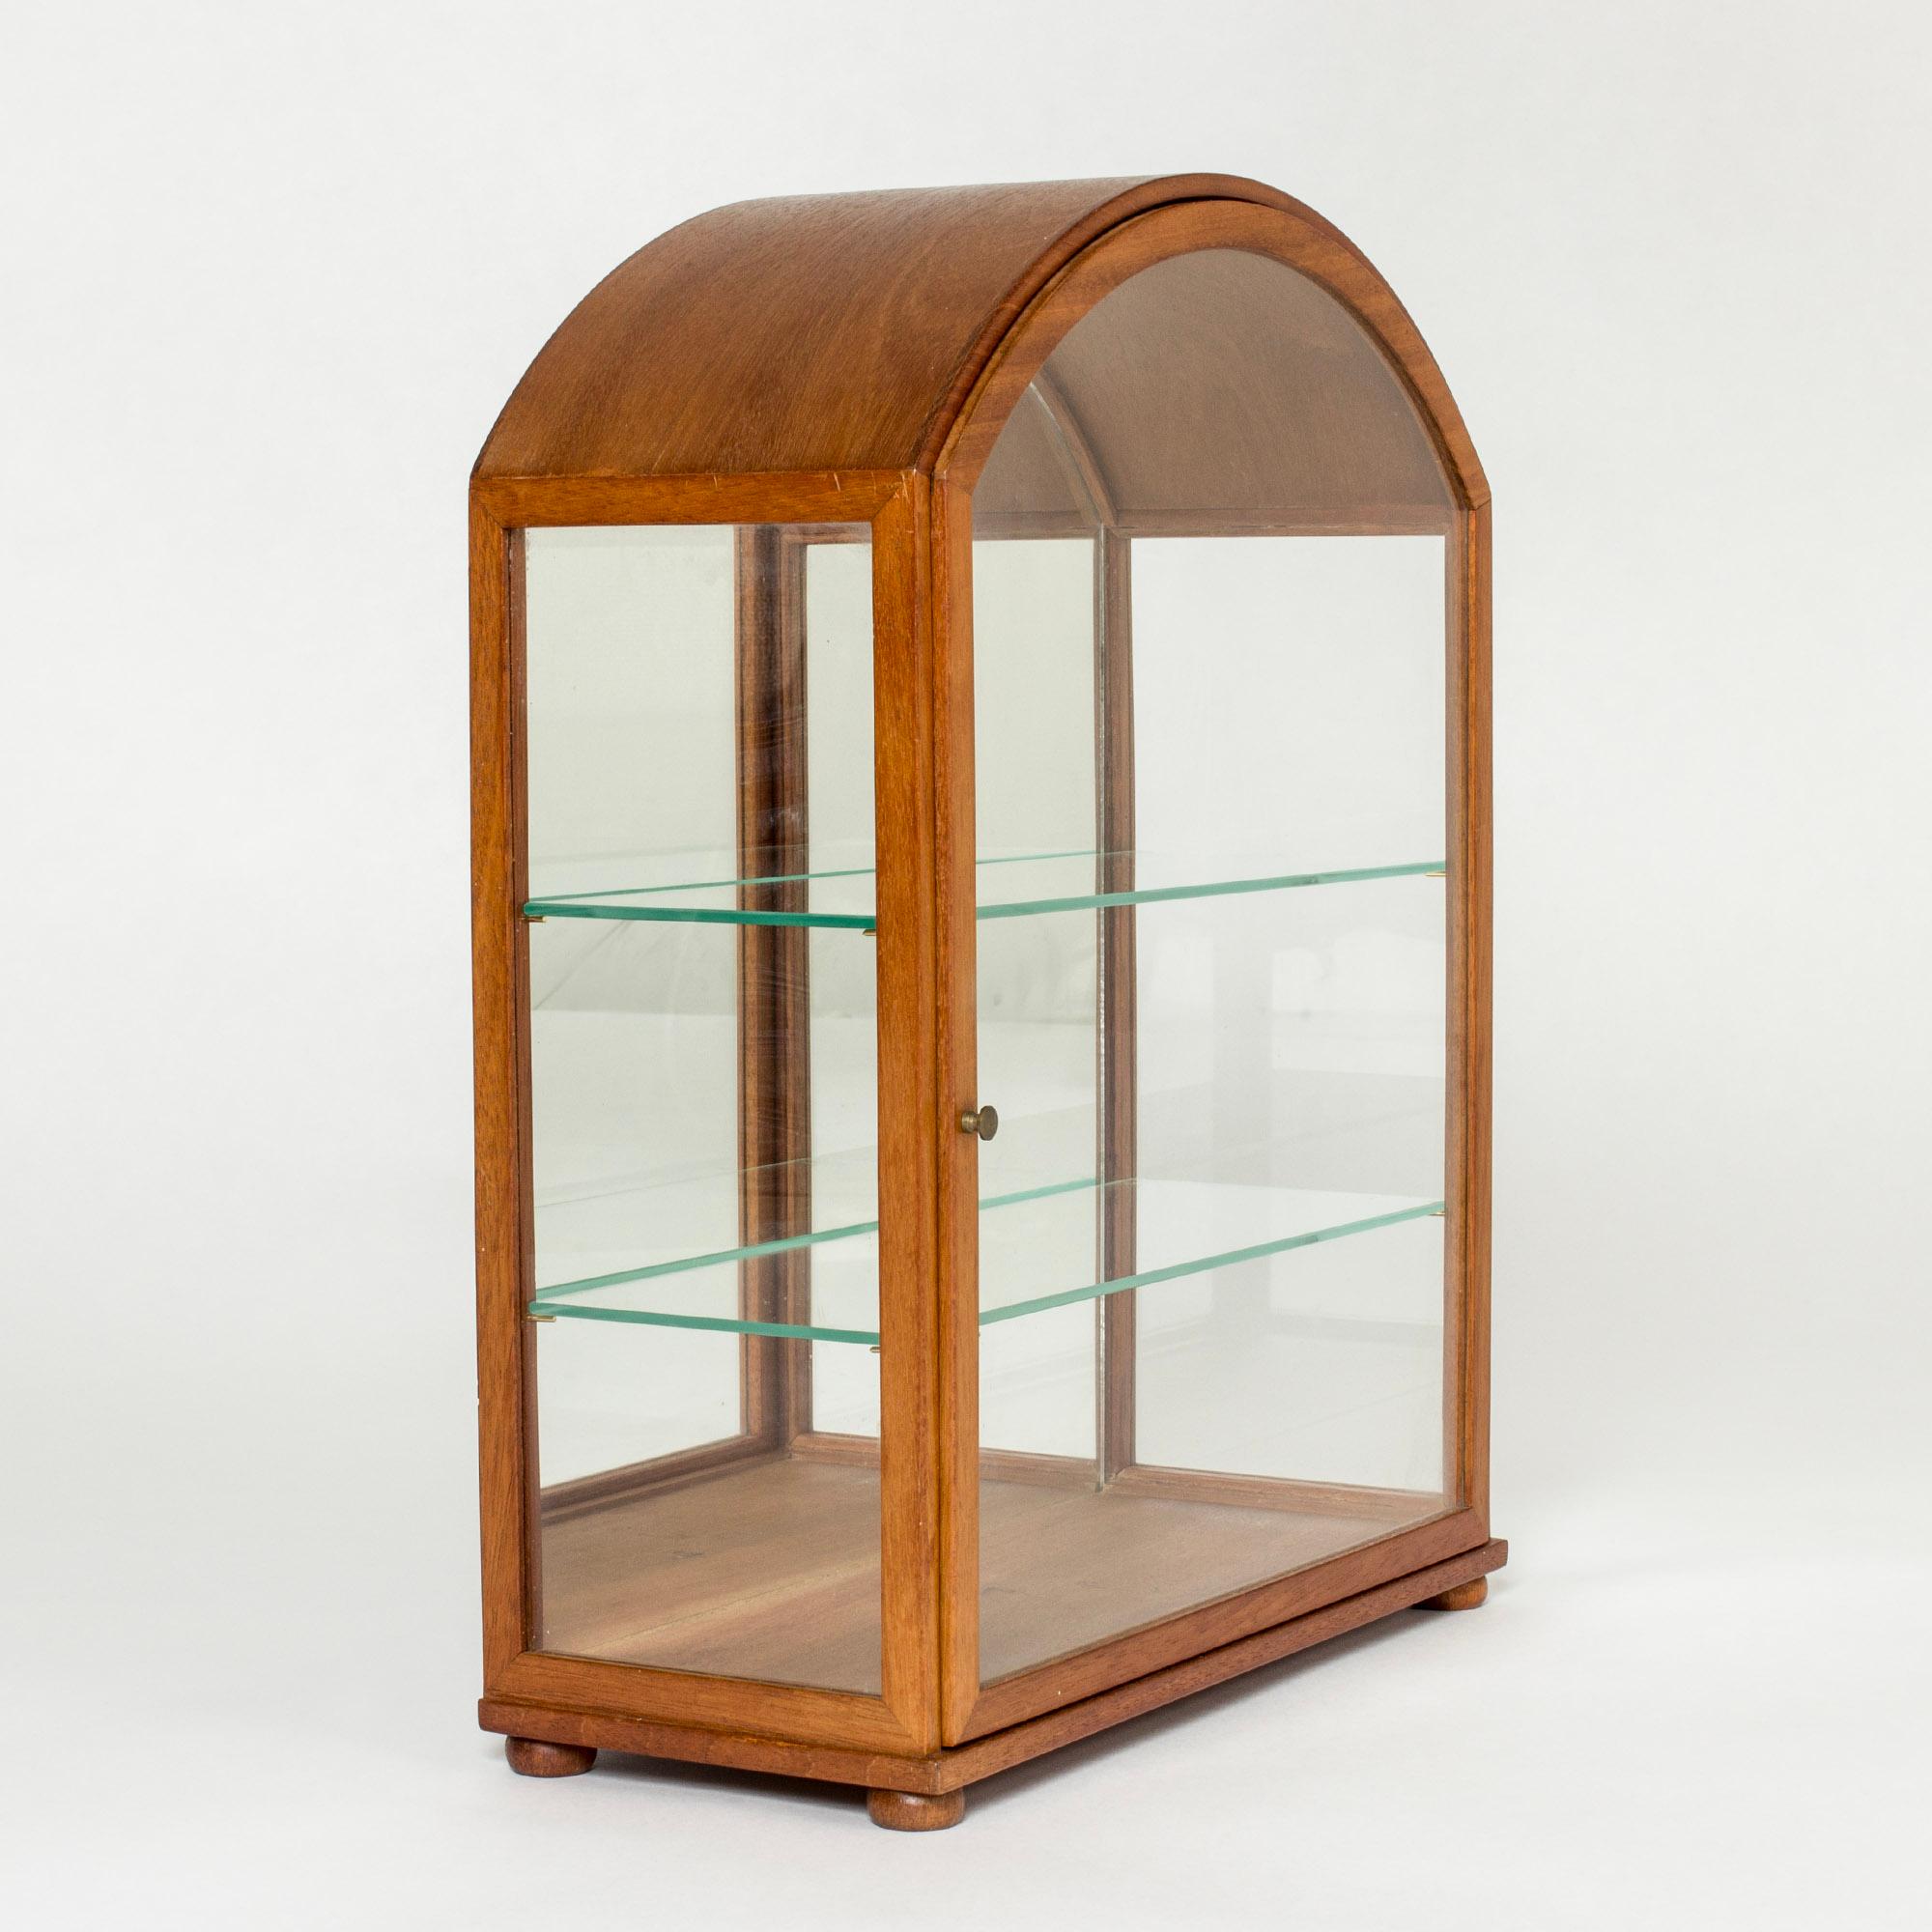 Beautiful table vitrine cabinet by Josef Frank, made from mahogany in a sleek design. Glass shelves and mirror bottom let the light flow freely. Perfect for displaying cherished objects.